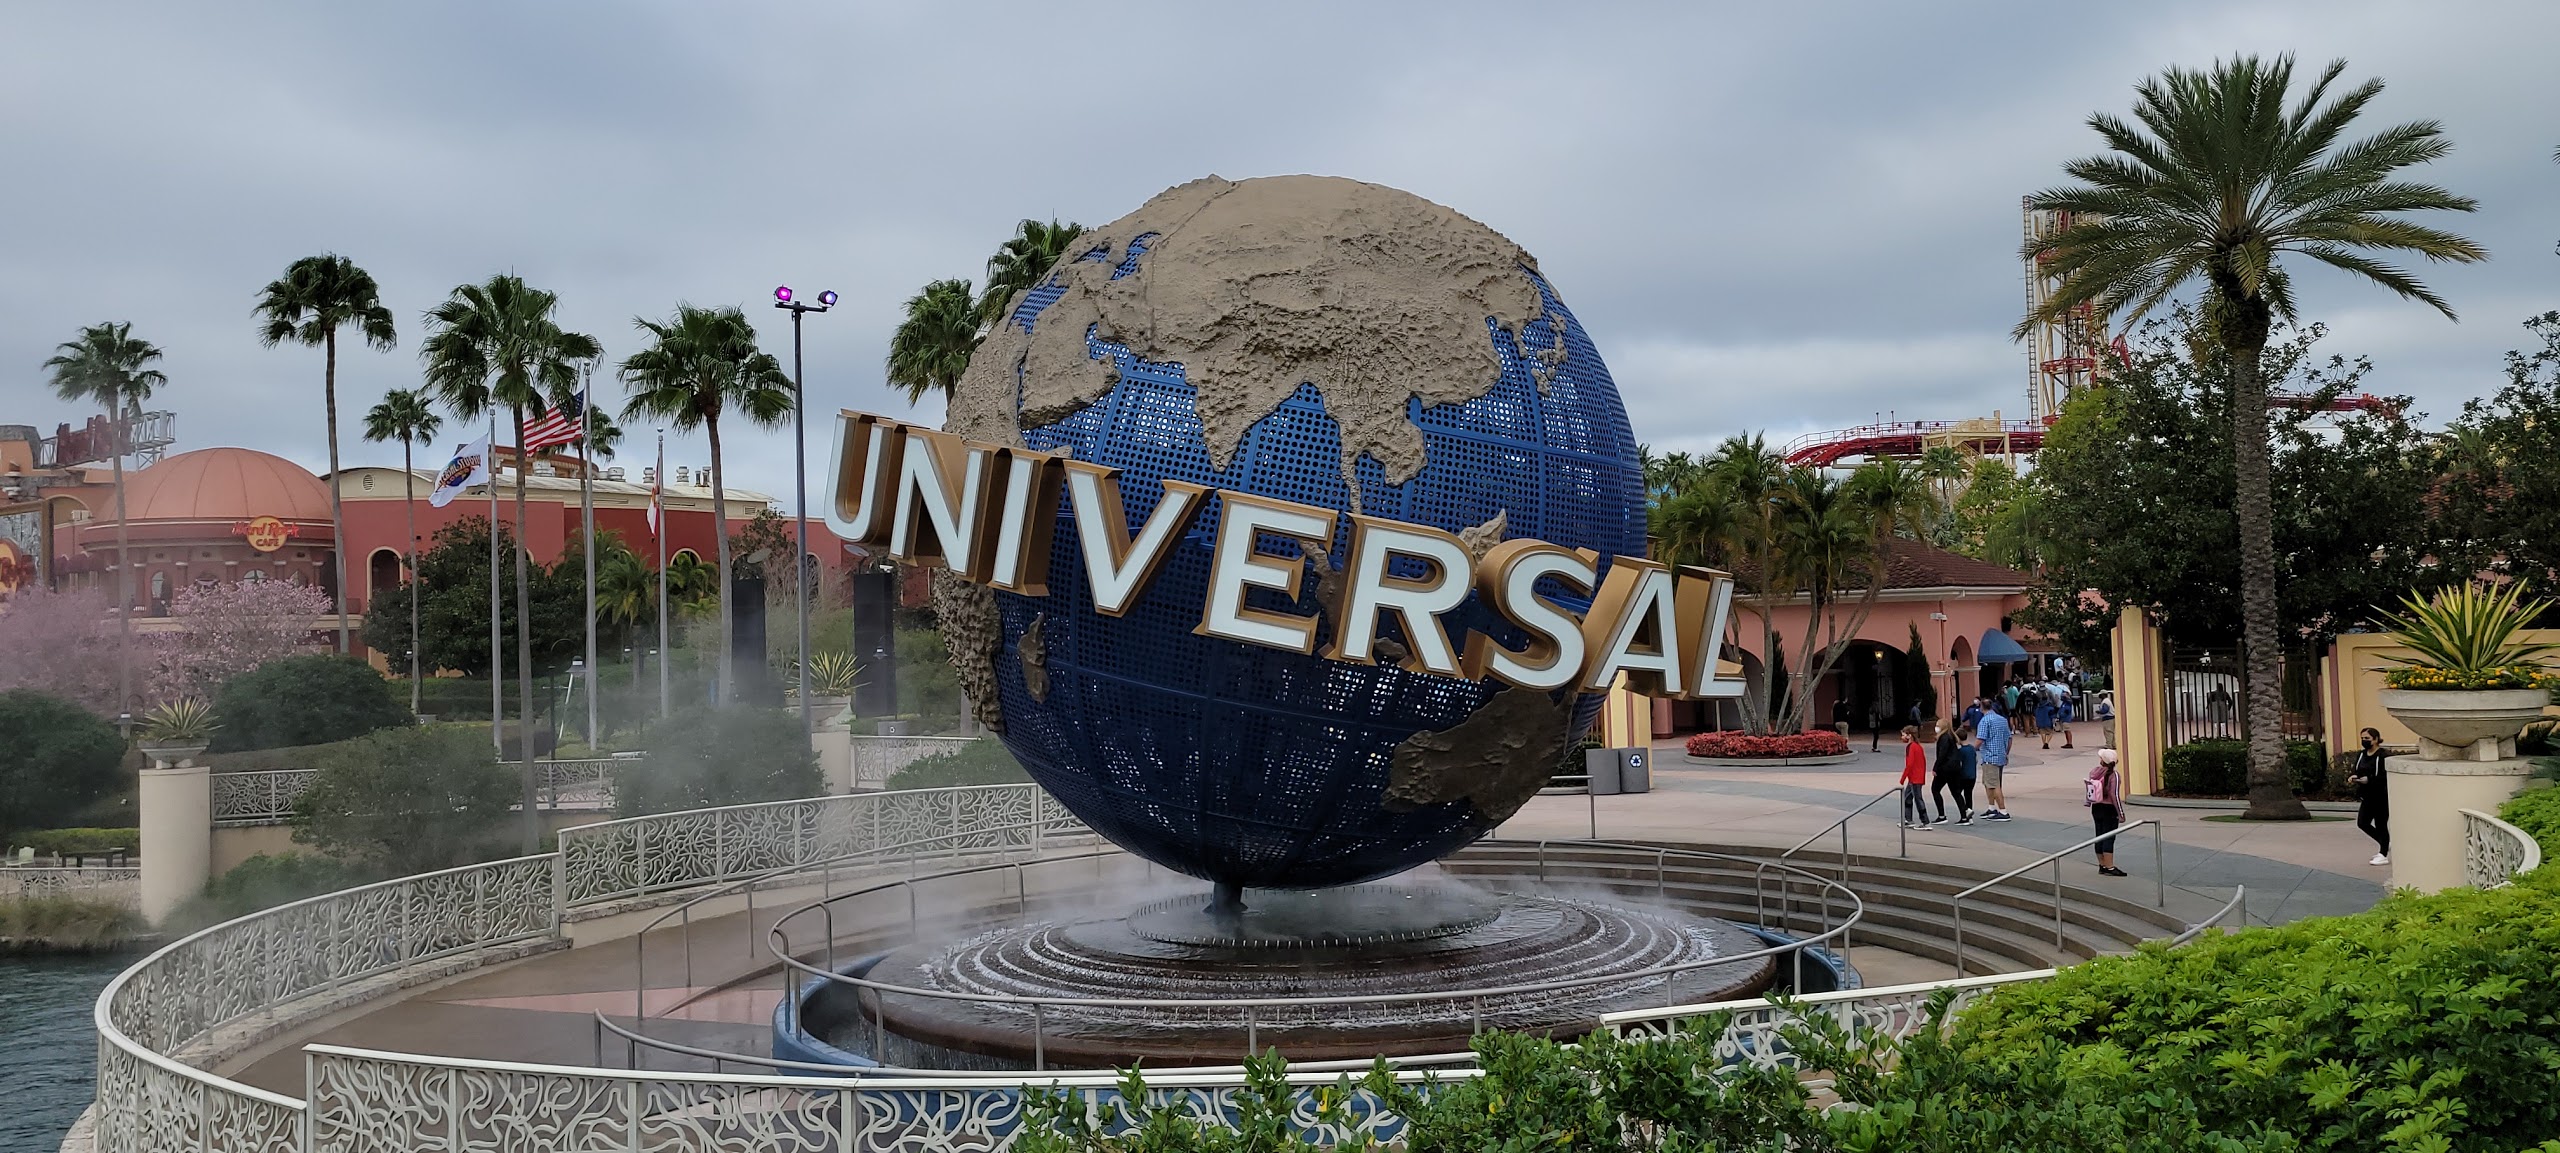 Universal Orlando Reaches Capacity For Second Day in a Row